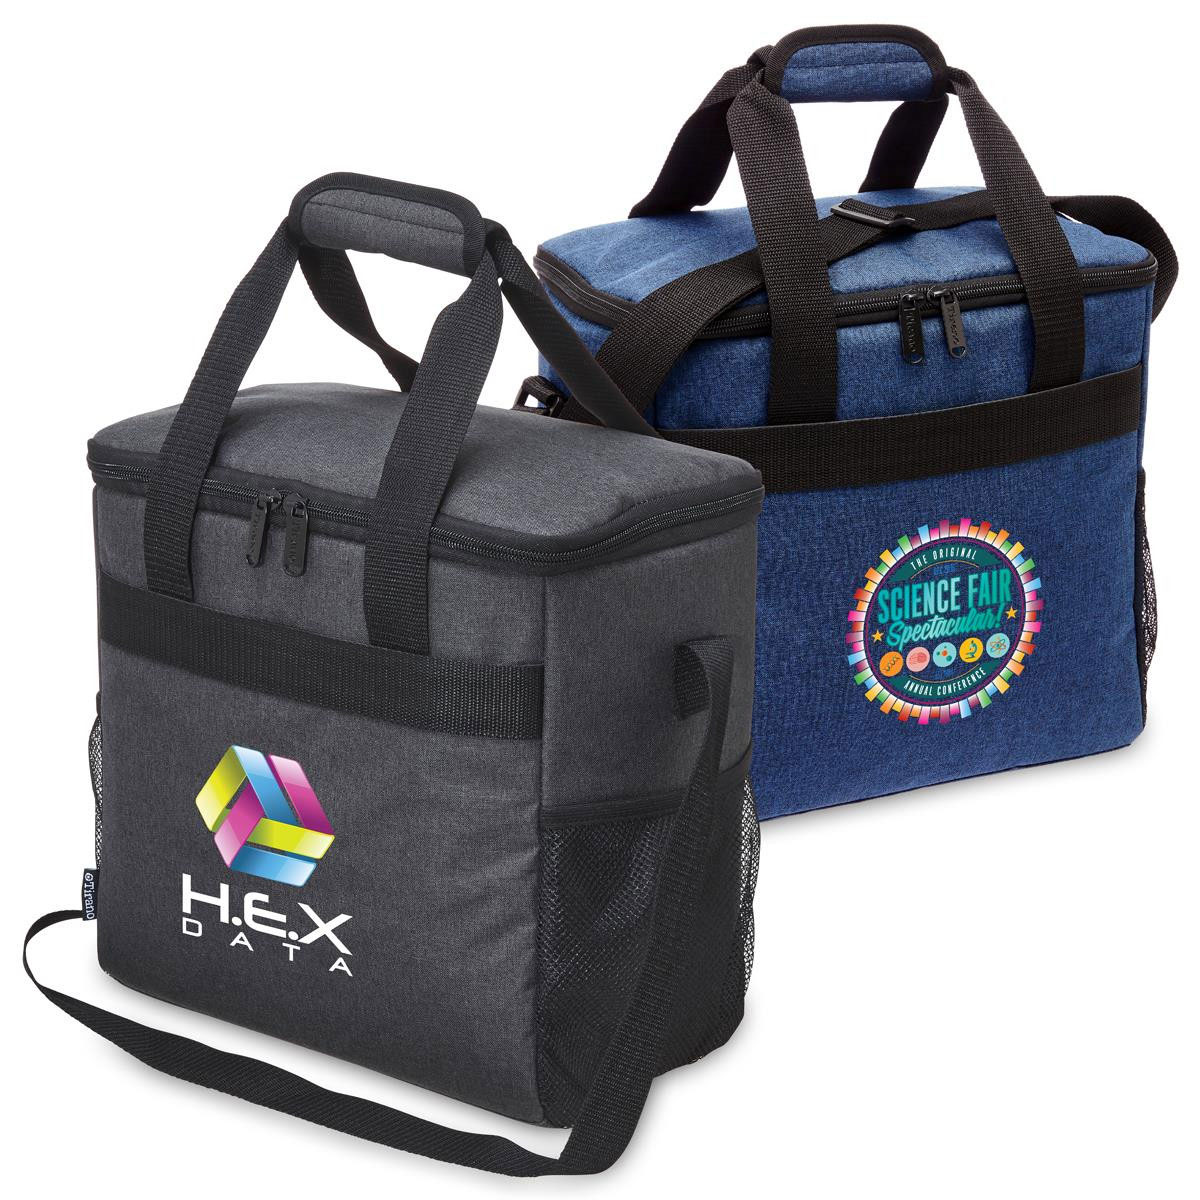 Promotional Tirano Cooler Bags Promotion Products